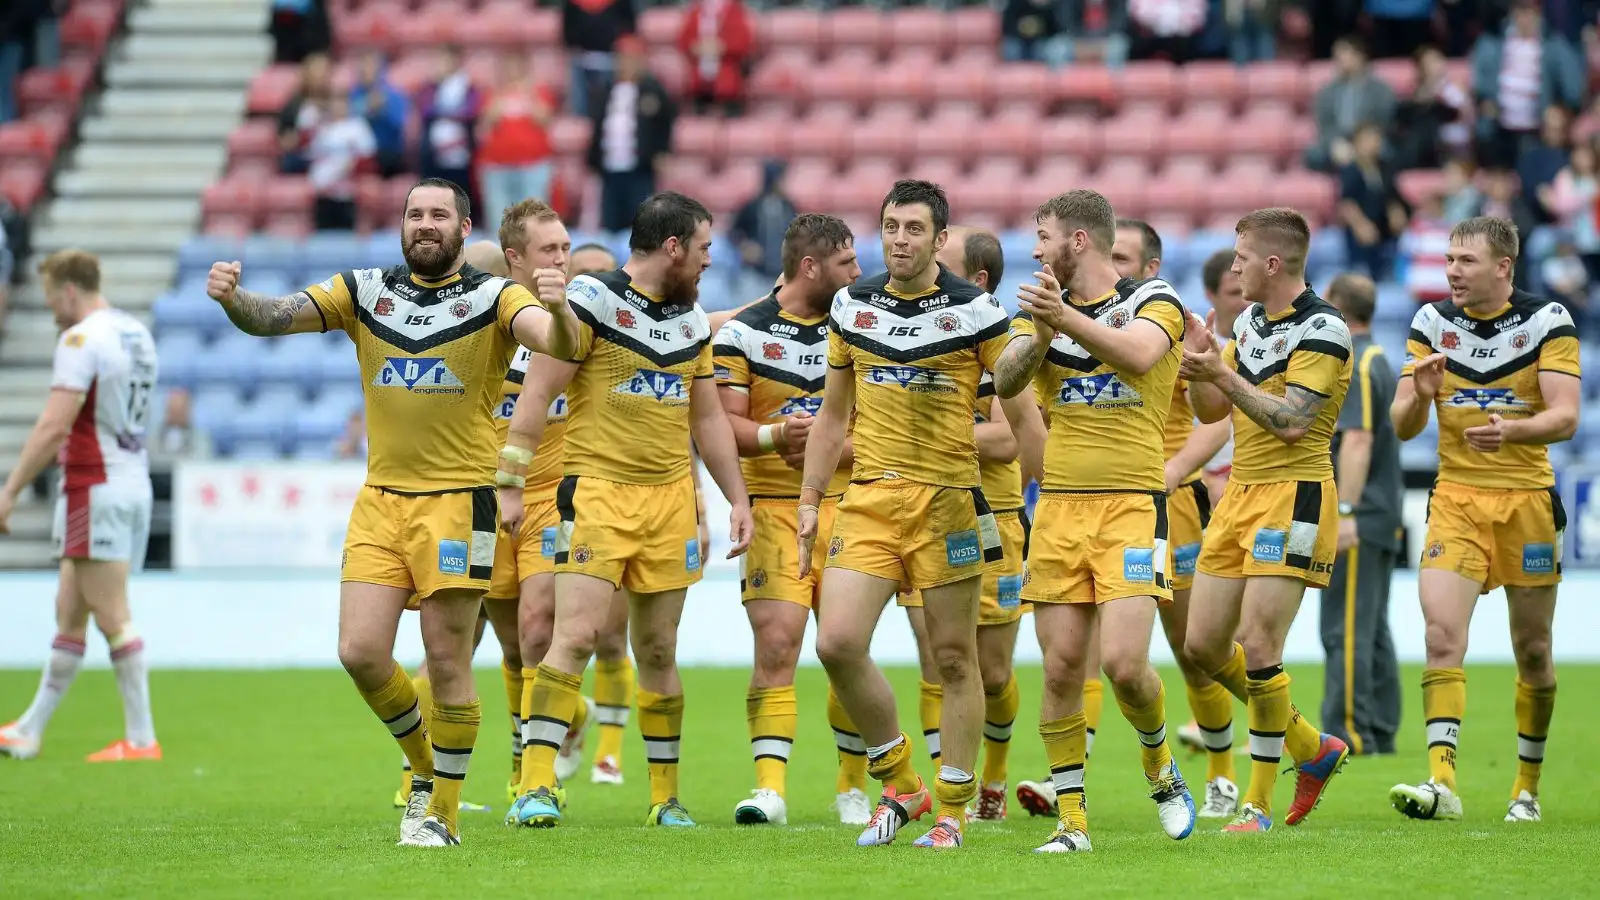 Where are they now? The Castleford Tigers side that beat Wigan Warriors in the 2014 Challenge Cup quarter-finals